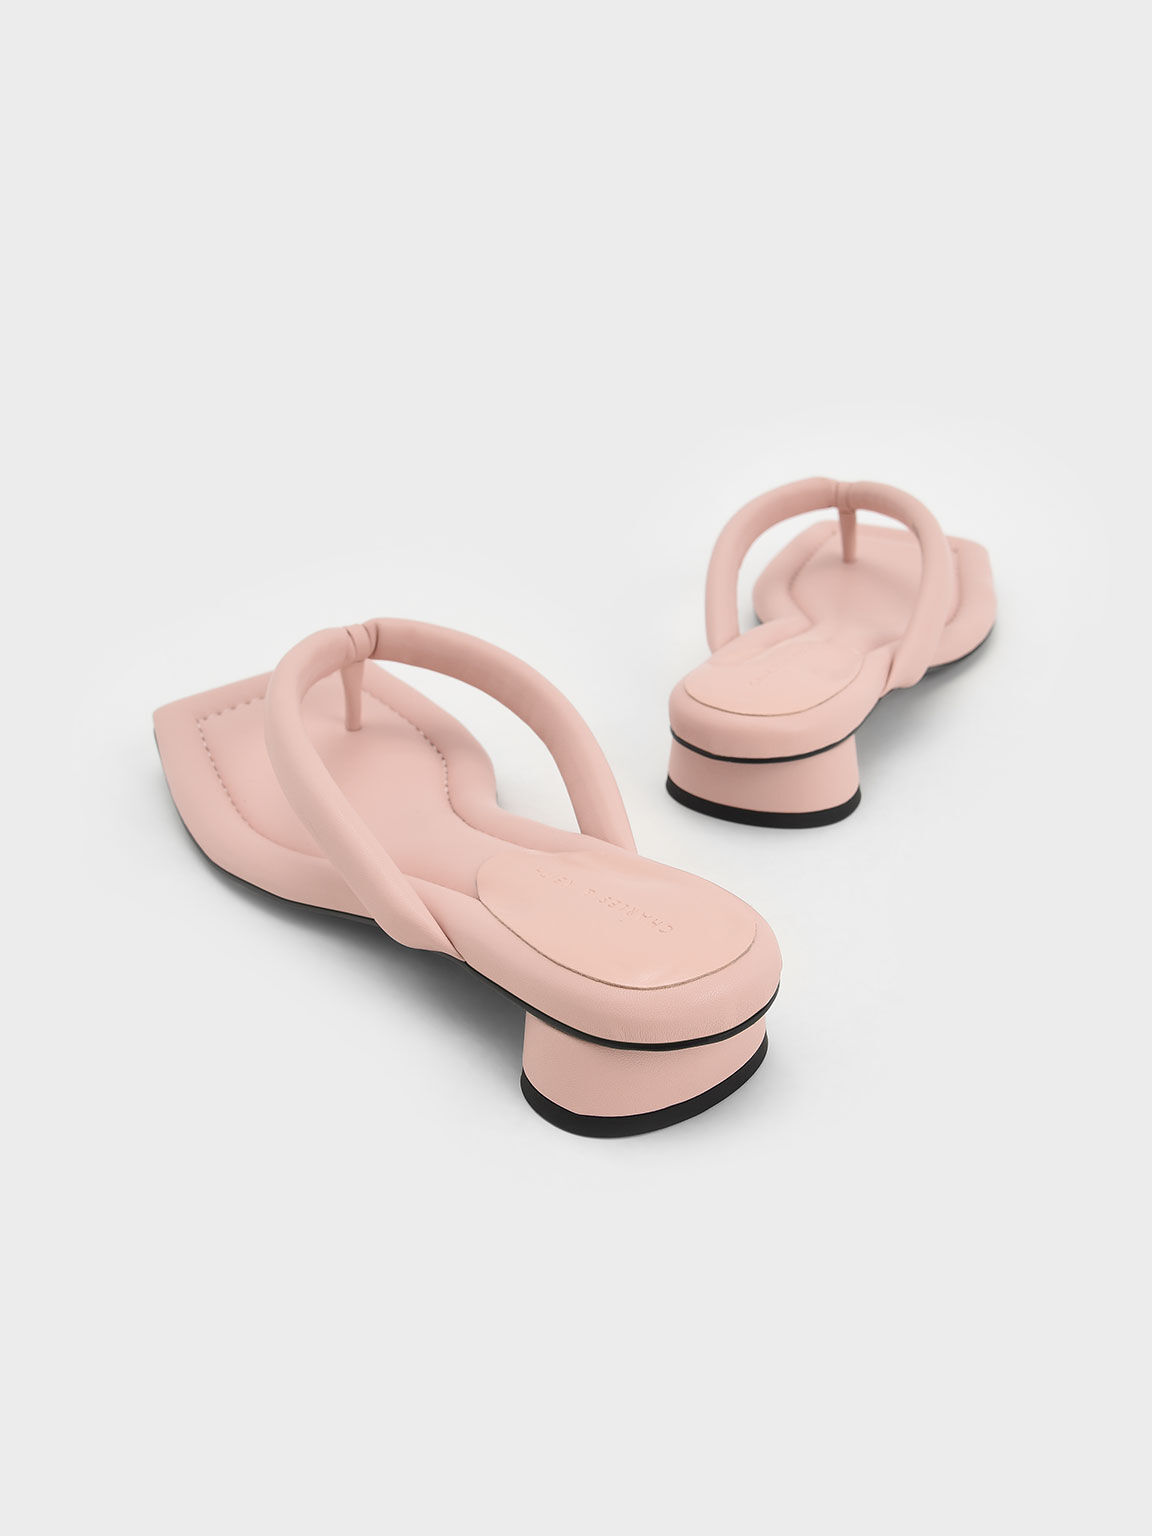 CHARLES & KEITH - The thong sandal is enjoying a revival — our purple  asymmetric-toed version with puffy straps gives the iconic '90s shoe style  a contemporary update. Shop now:   #CharlesKeithCelebrates #